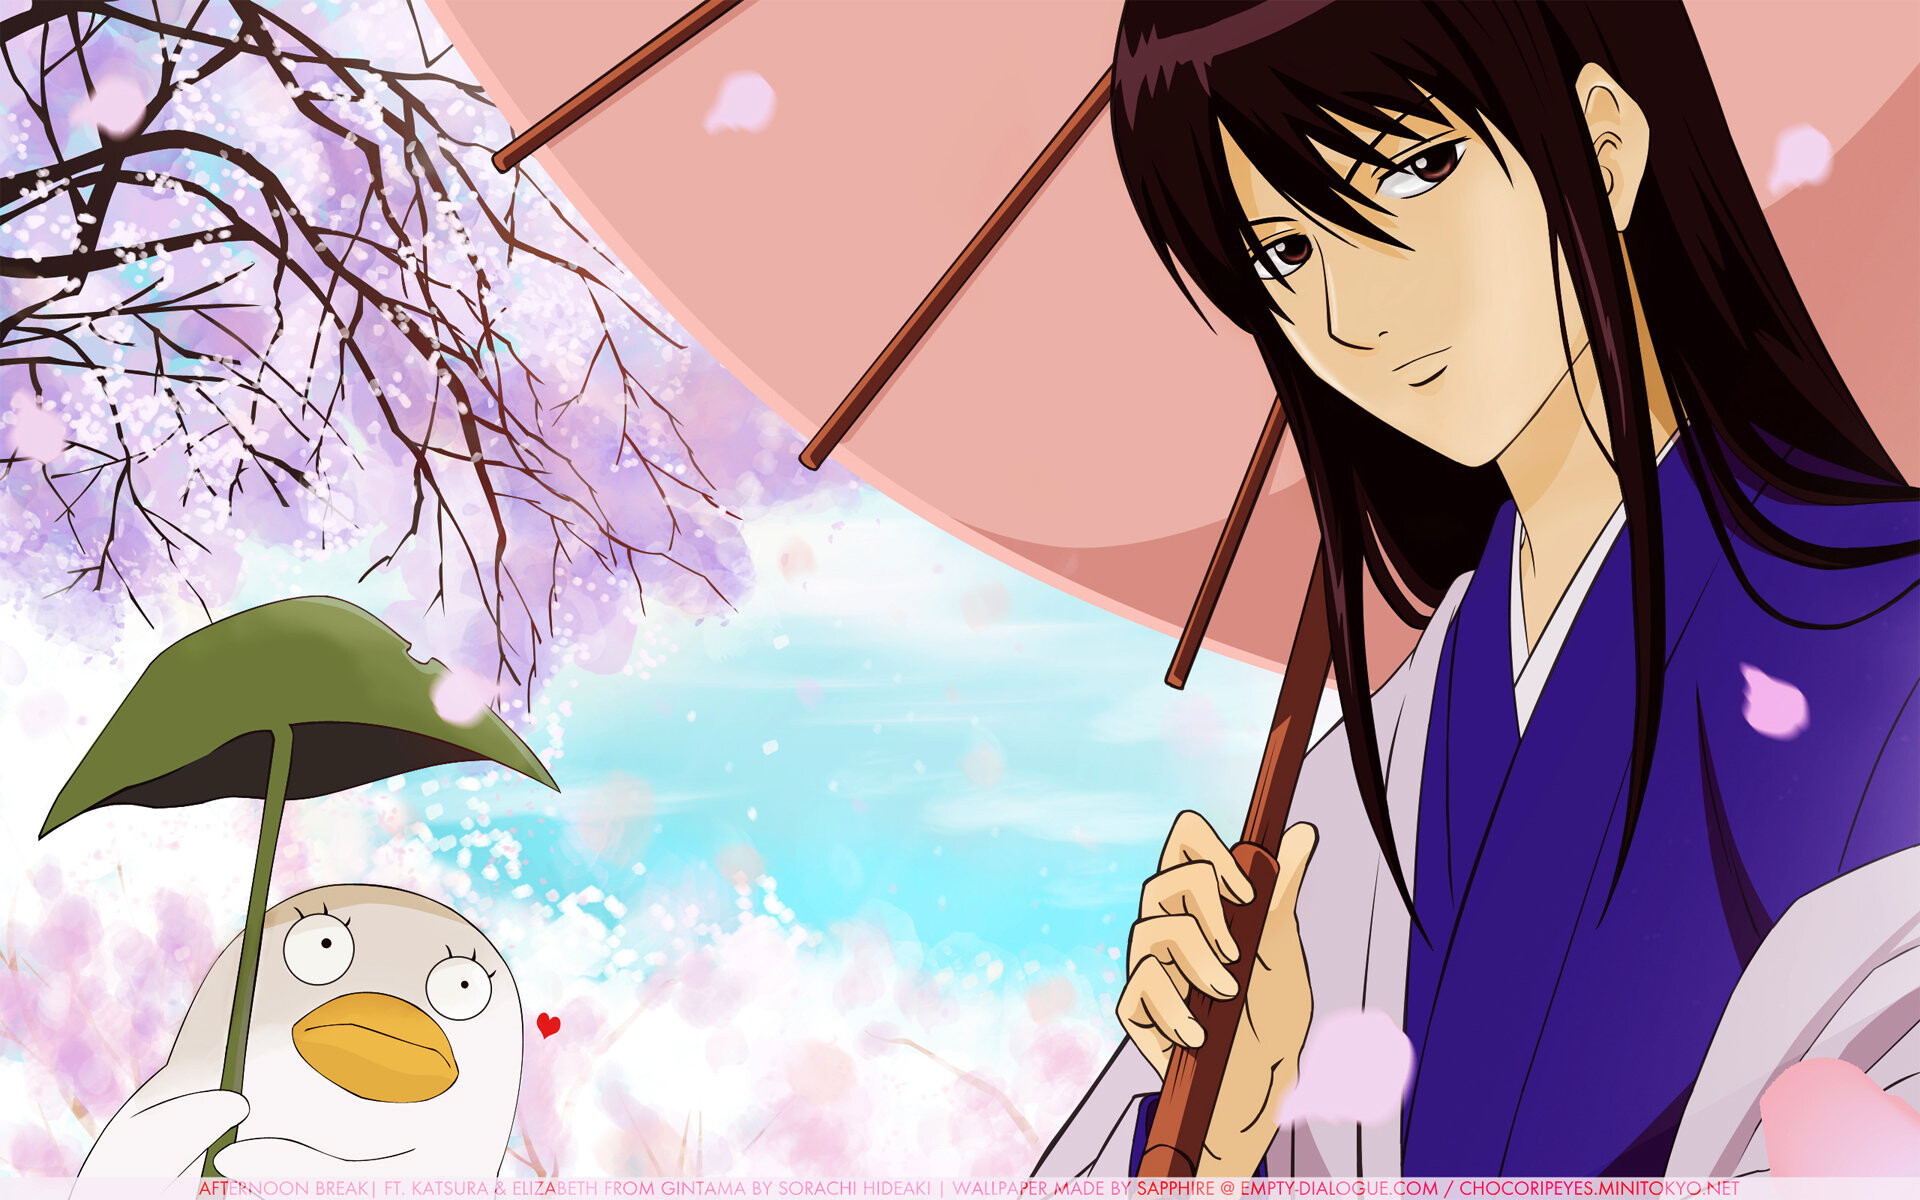 Gintama (TV Series): Katsura Kotarou, The leader of a moderate Joui faction and a fugitive wanted by the authorities. 1920x1200 HD Background.